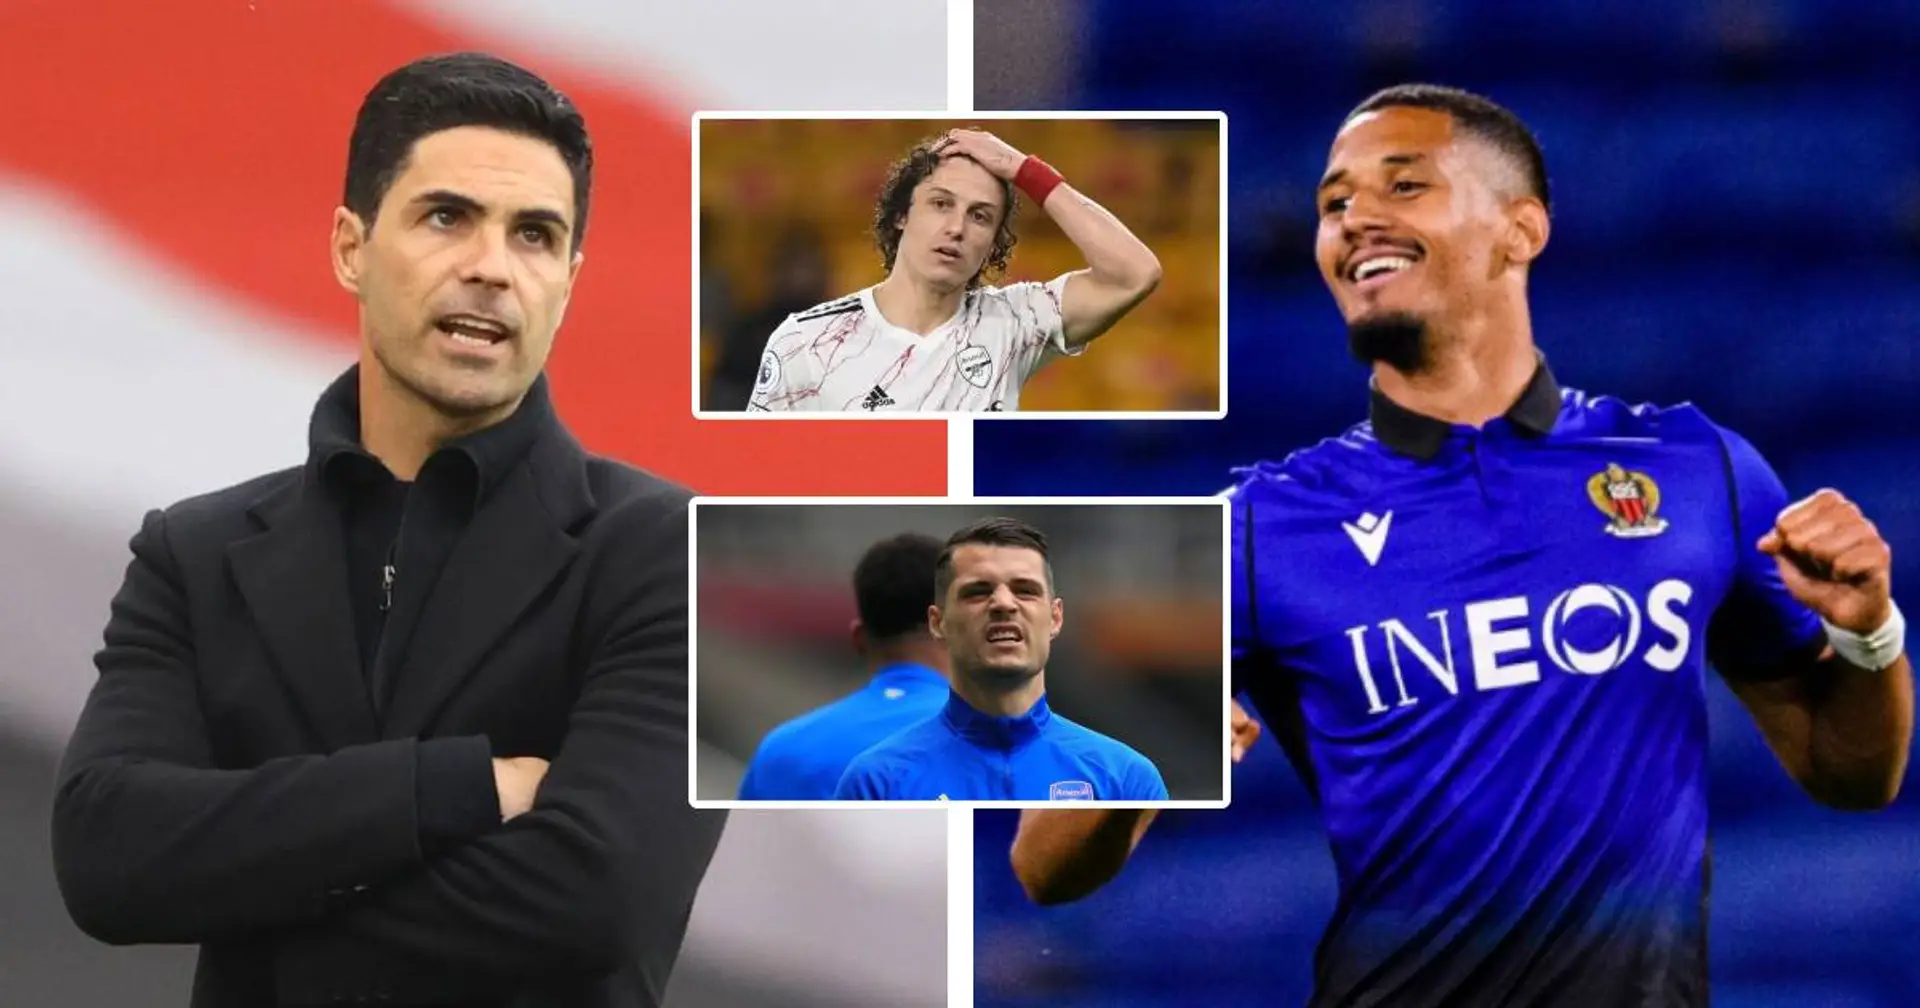 'Imagine preferring an Albanian calamity & an aging clown to one of the most gifted French CBs': fans fuming with Arteta after Saliba's POTY nomination